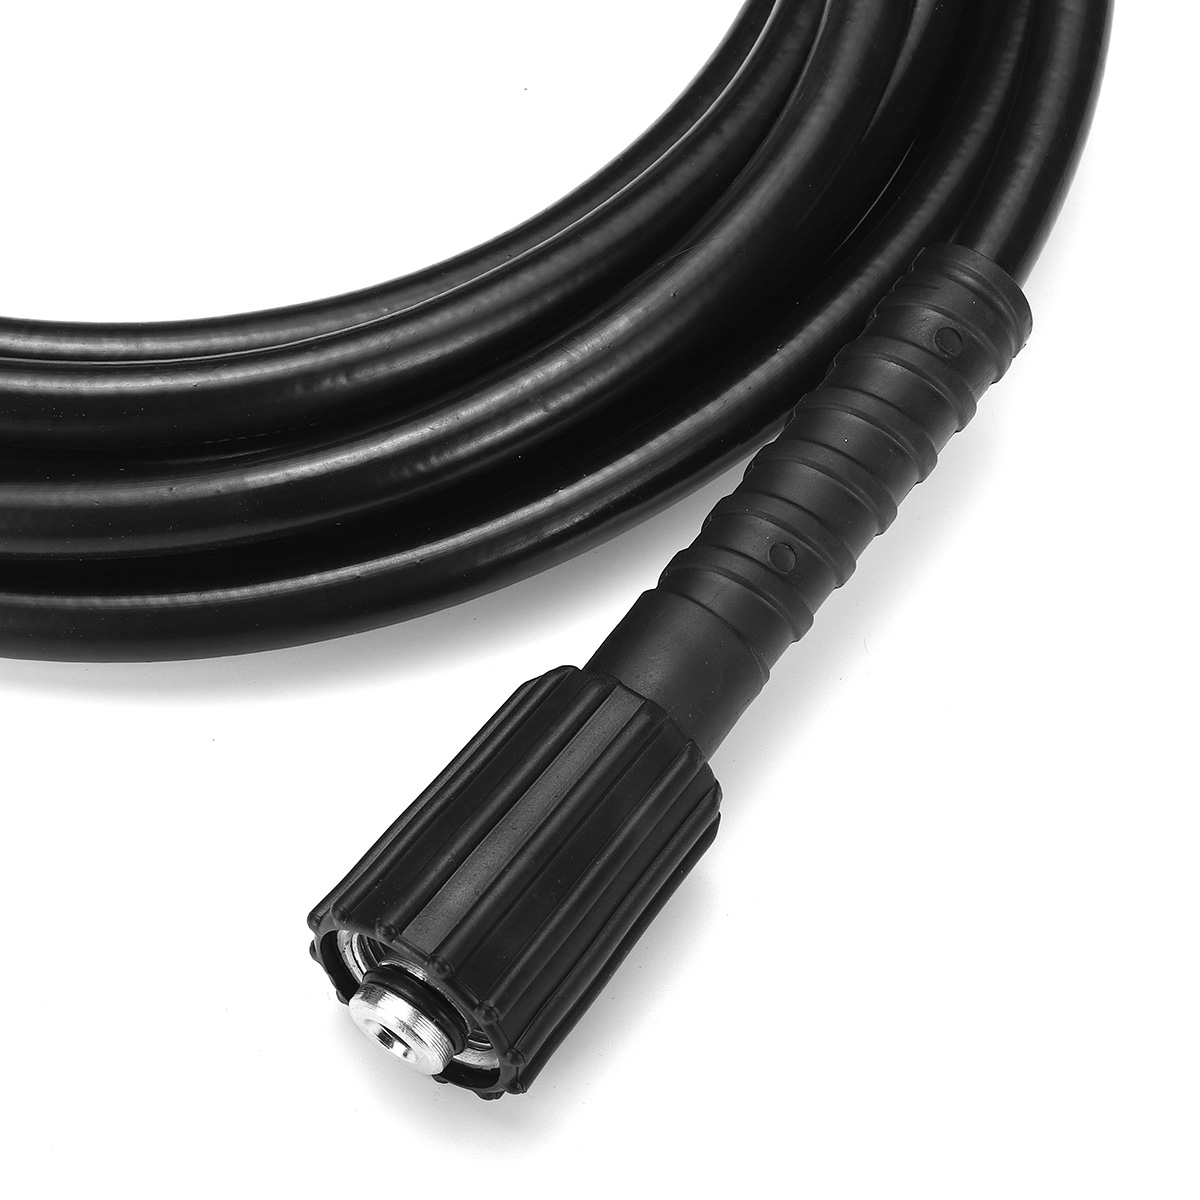 3-24M-High-Pressure-Washer-Drain-Cleaning-Hose-Pipe-Cleaner-For-Karcher-K2-K3-K5-1455881-8